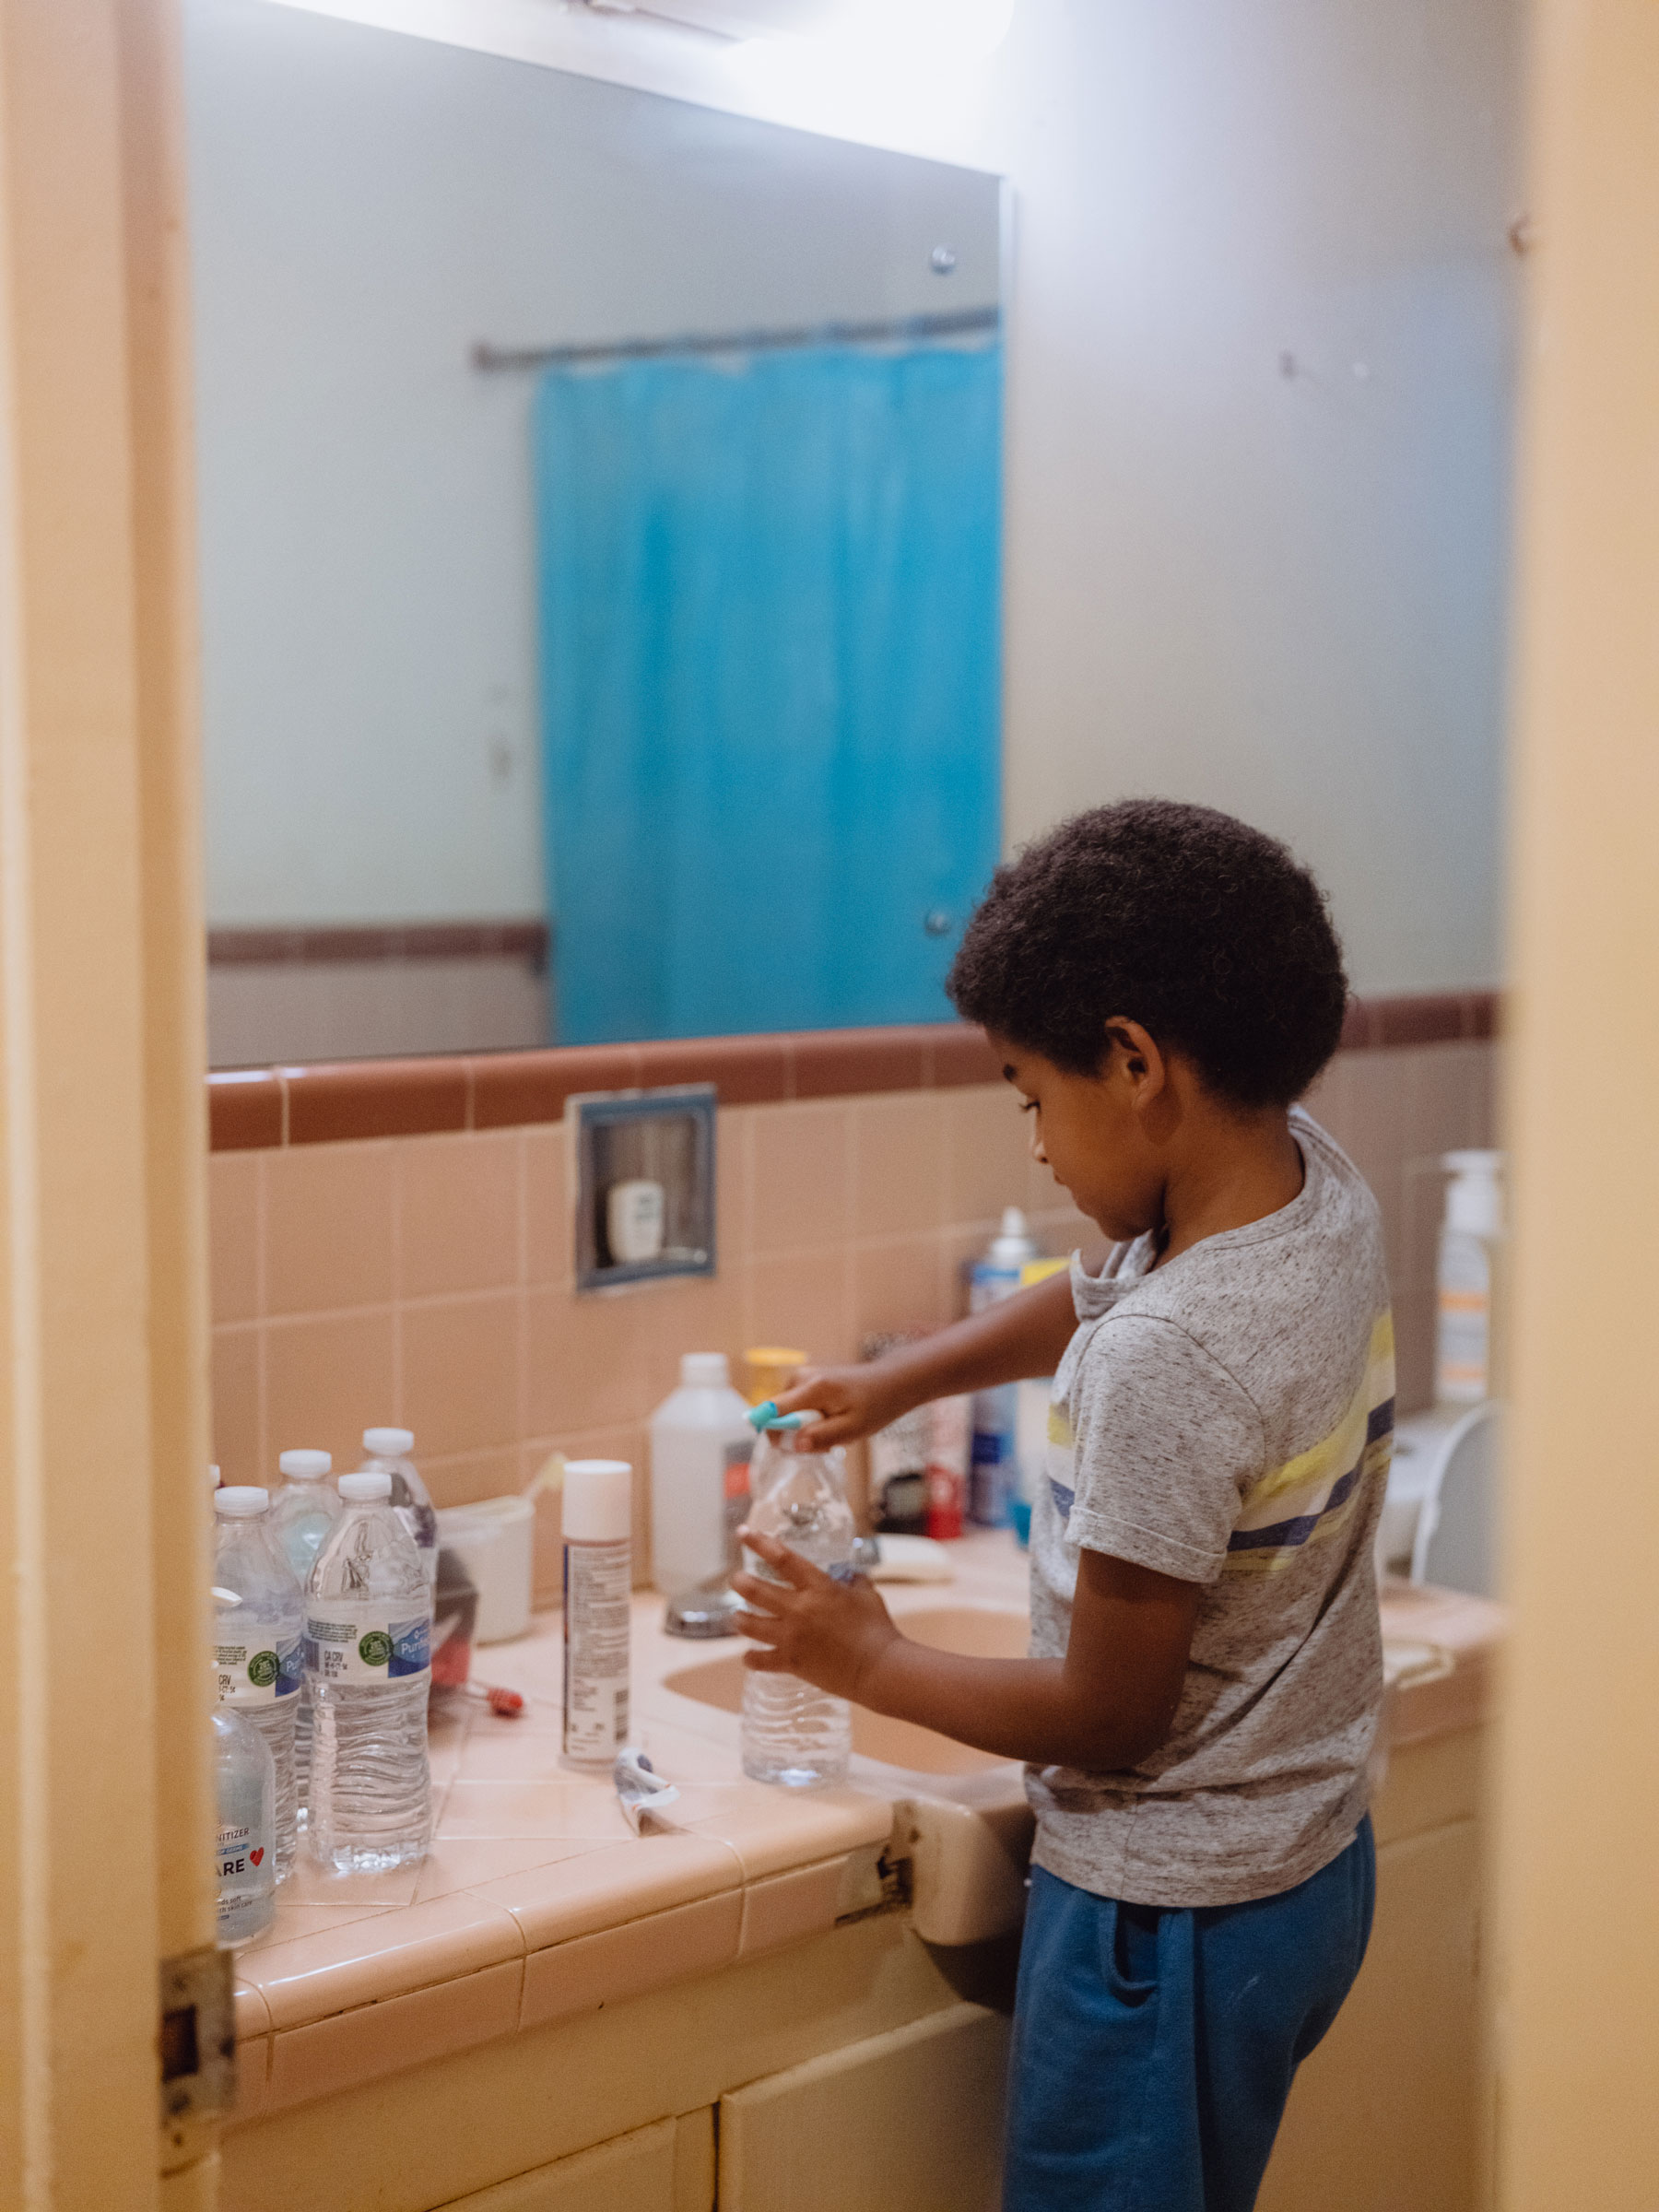 Langston Floyd, 6, uses bottled water to brush his teeth on Sep. 5, 2022 in Jackson. The day to day challenges of having to use bottled or boiled water for almost every aspect of their life is not a new concept for the Floyd family. For the majority of Langston's life there have been multiple boil water notices for the city of Jackson every year. (Christopher Lee for TIME)